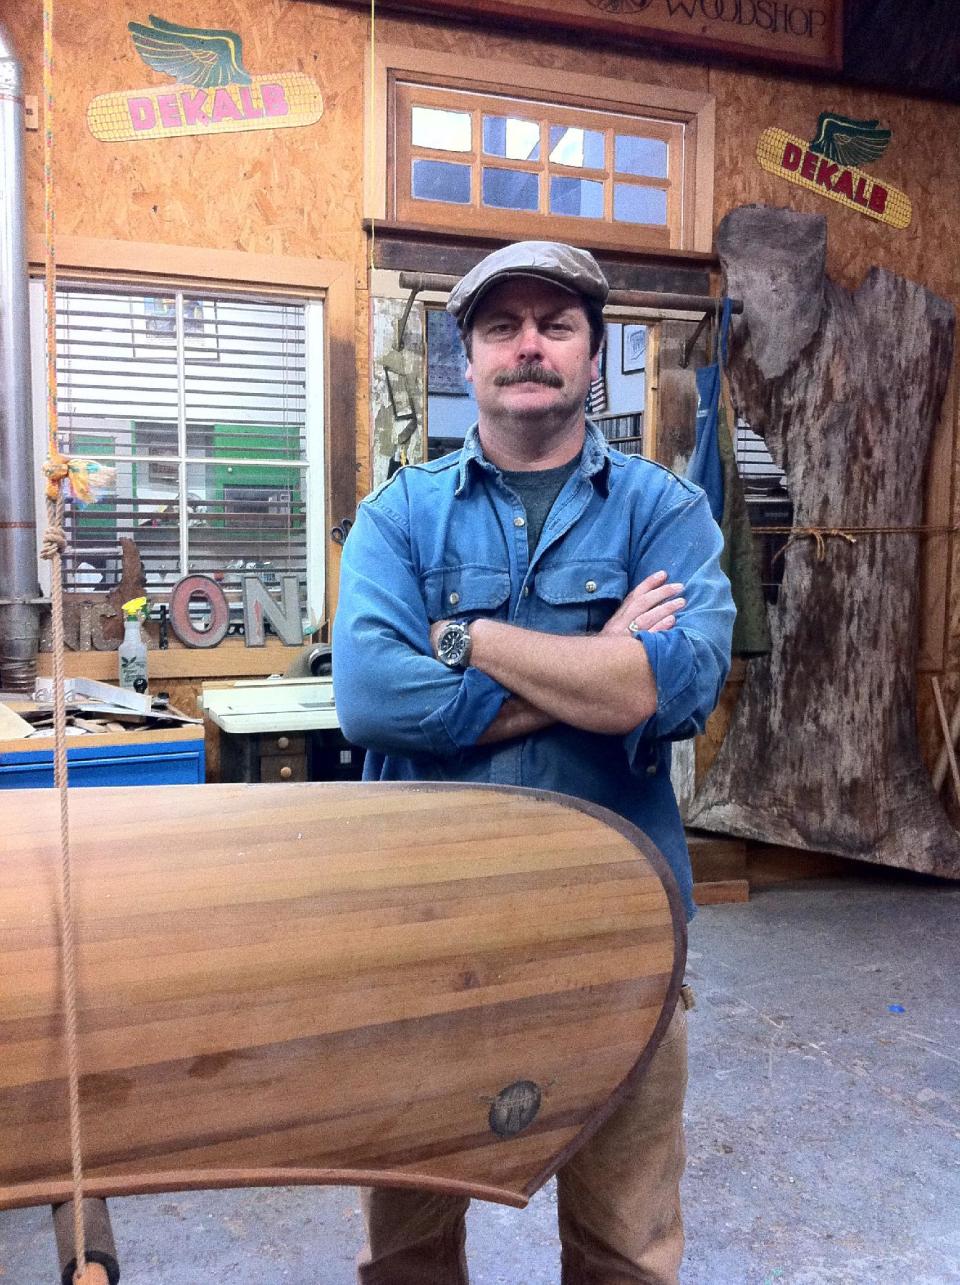 In this February 2012 image released by Jessica Glazer, Nick Offerman, who plays Ron Swanson on NBC's "Parks & Recreation," stands next to one of two canoes he built as shown in his Woodworking Studio in Los Angeles. Building boats requires a particular kind of commitment. It's complex and expensive. It can take months or years. And it can be addictive, working out in the garage, sawdust clinging to your clothes, making mistakes and finding the solutions yourself. (AP Photo/Jessica Glazer)